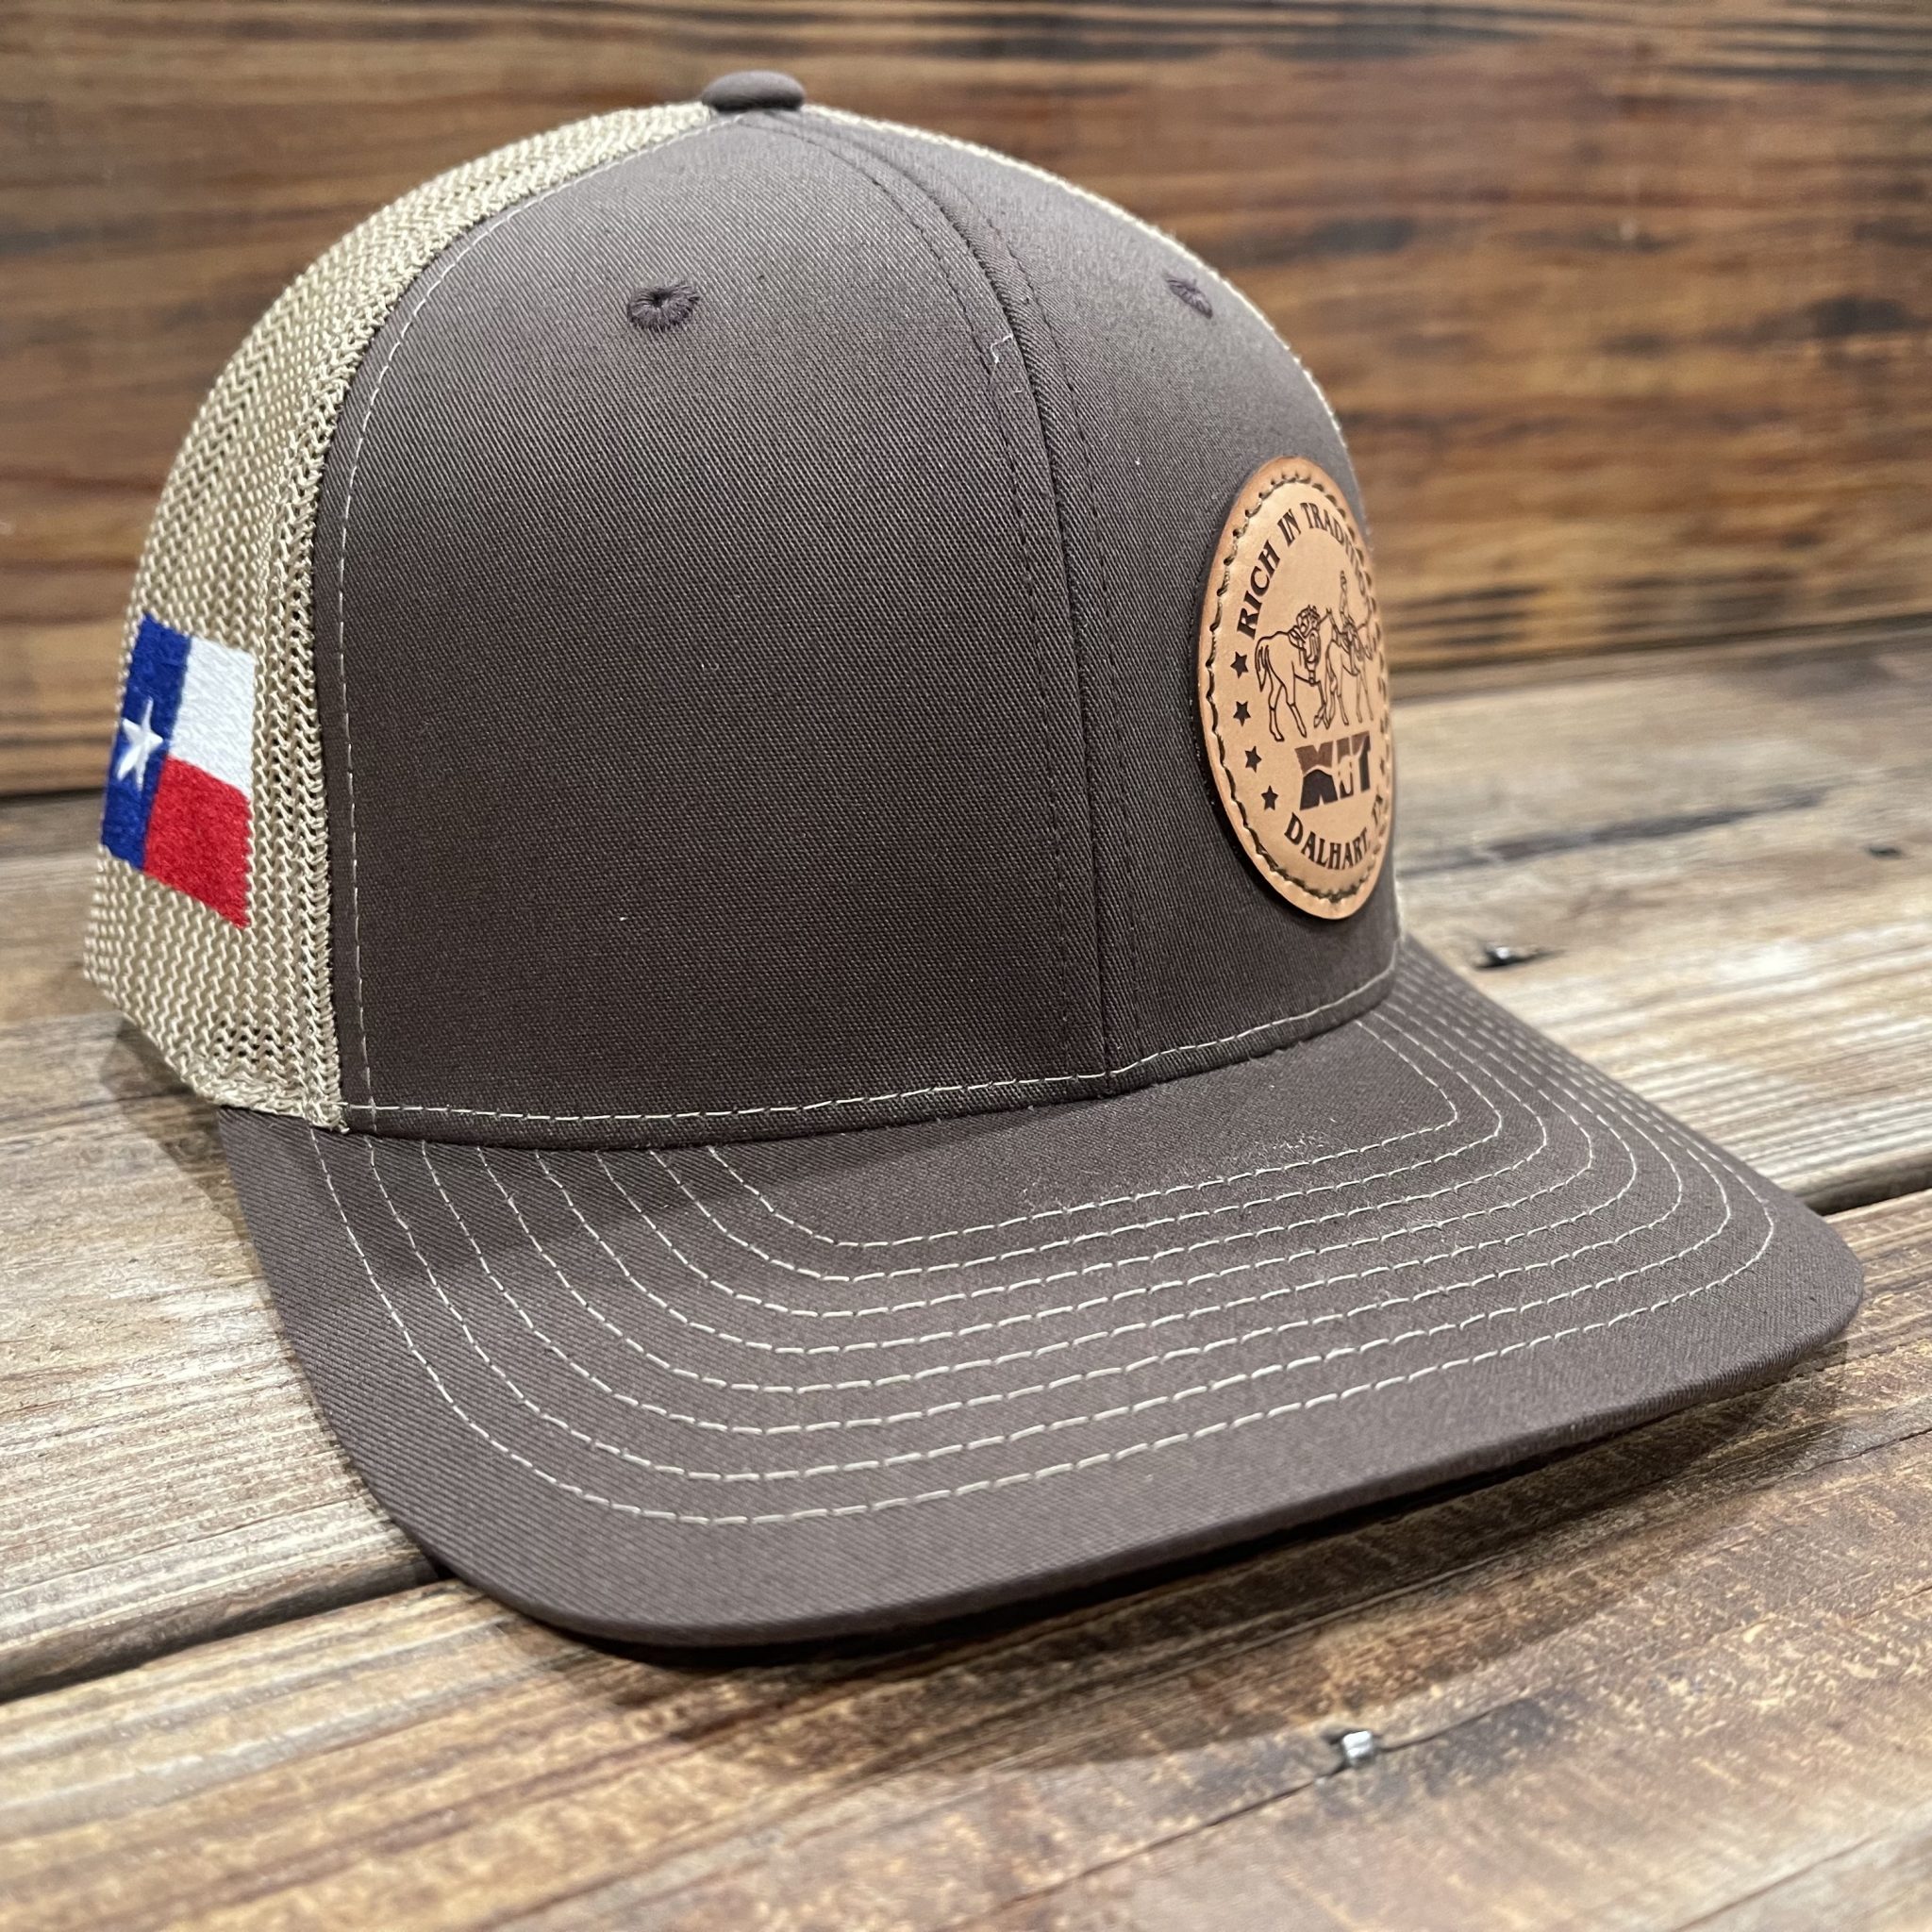 Hashtag Leather Dark Brown Patch Engraved Trucker Hat One Legging it Around #Lainesse